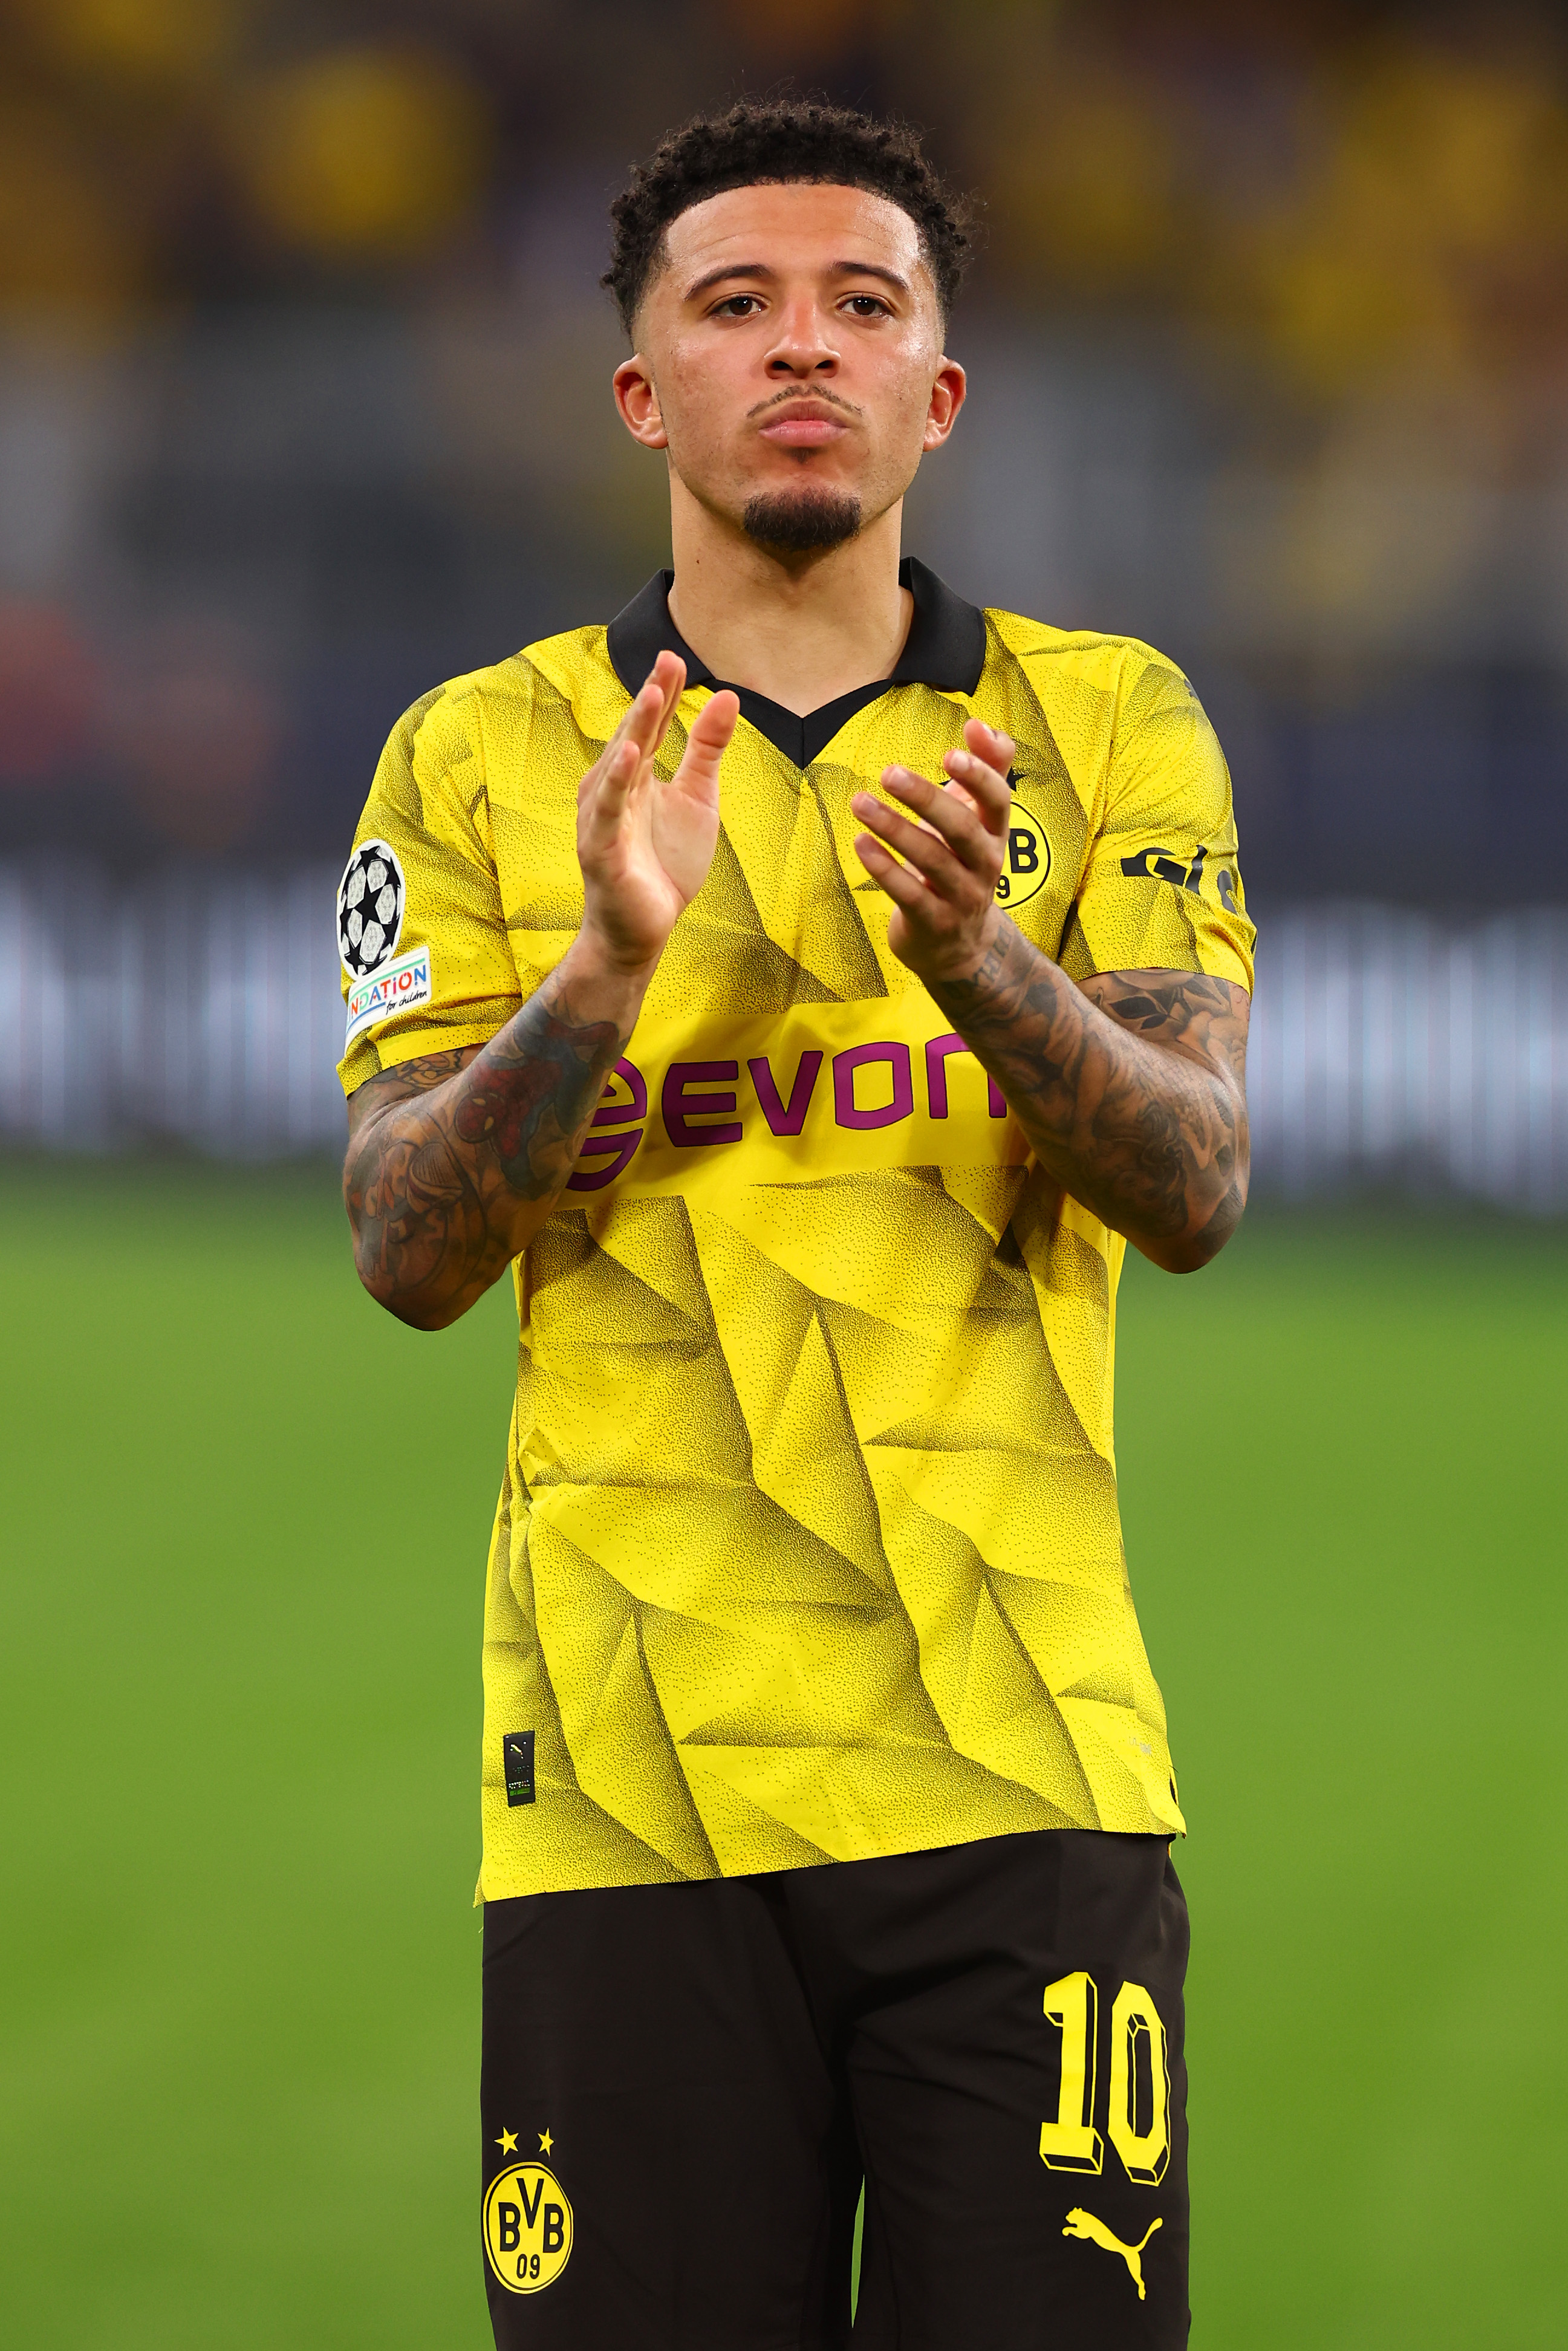 Man Utd are set to offload Sancho